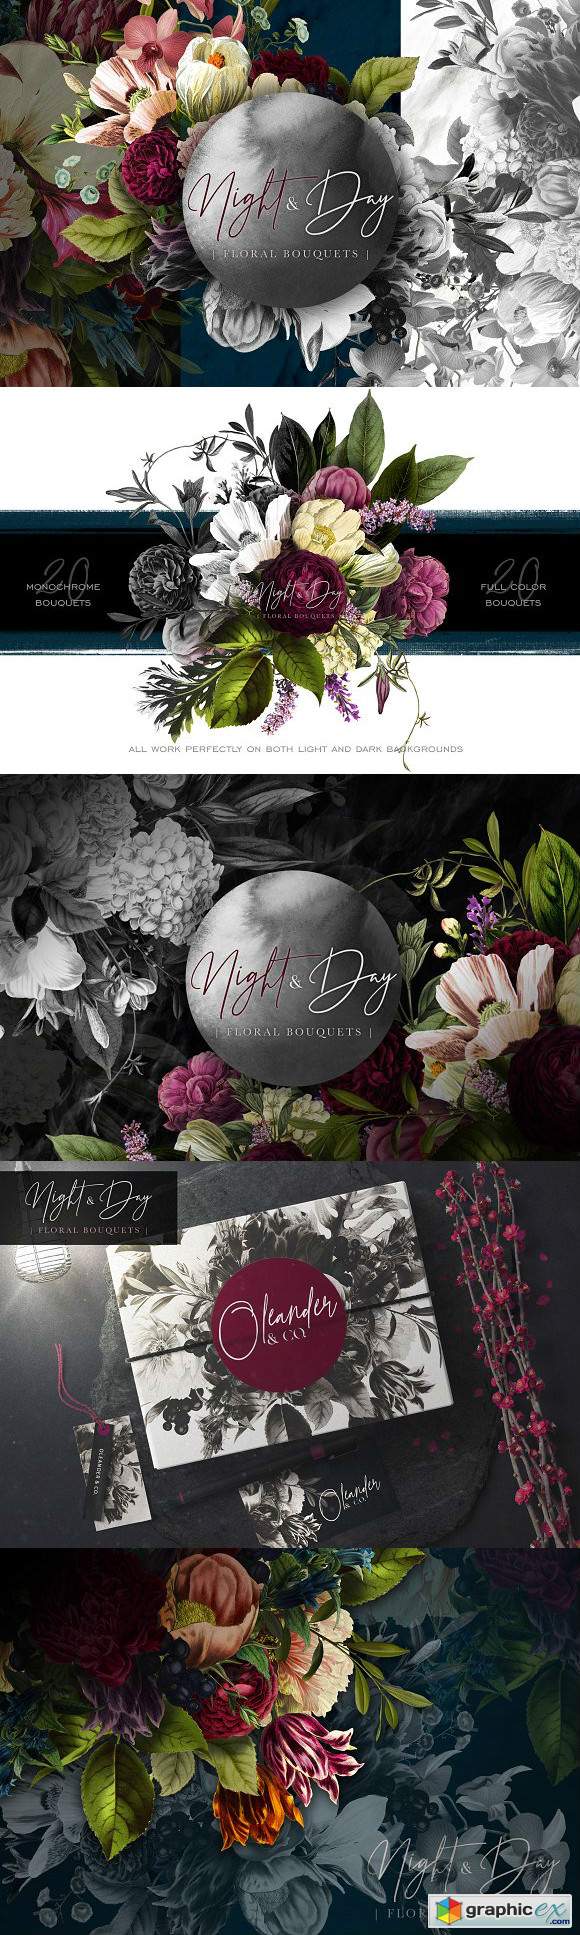 Night and Day Floral Bouquets